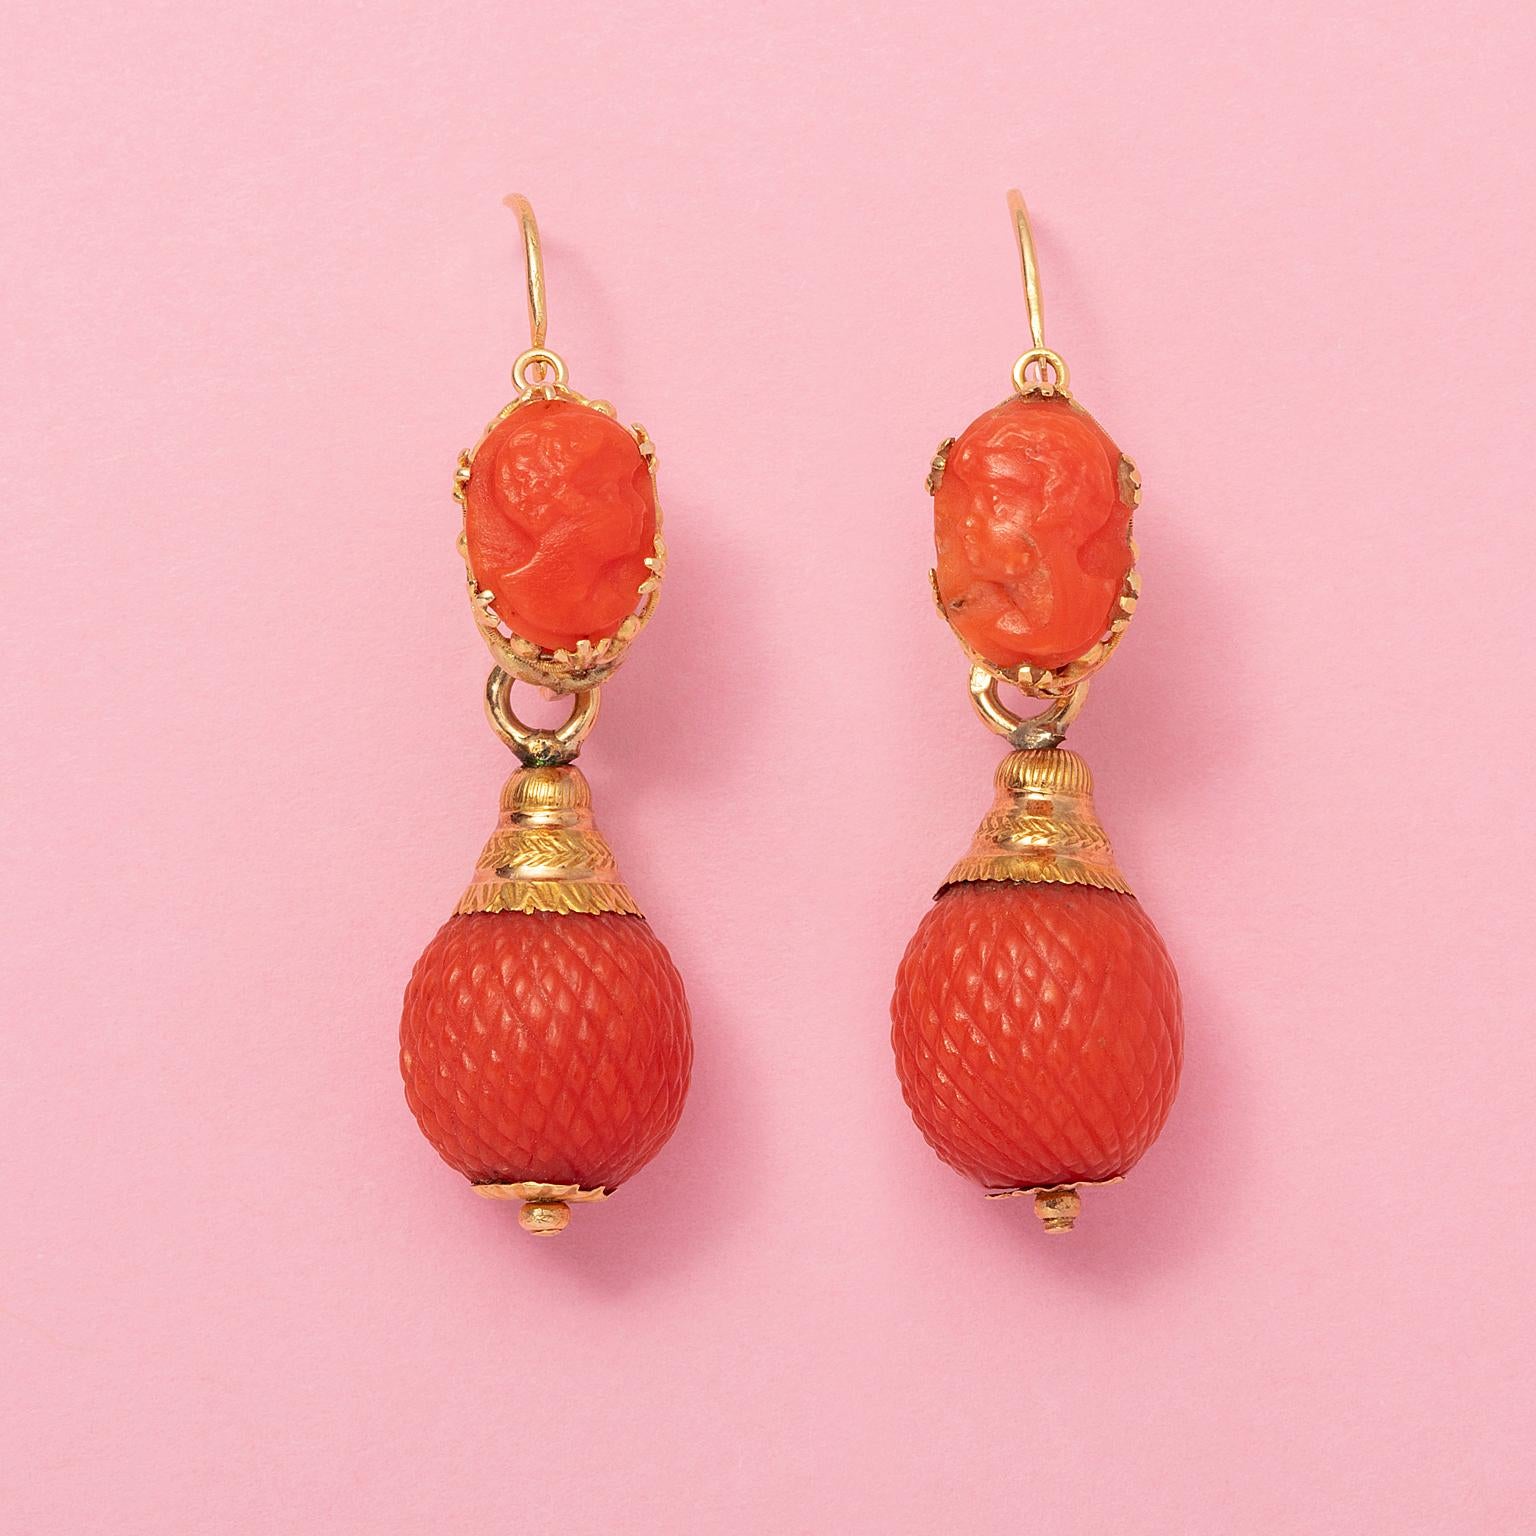 A pair of 18 carat yellow gold - day and night - earrings. A beautiful coral cameo of a lady set in a crown shaped chaton mounted on an elongated earring, underneath suspends a pineapple shaped coral bead, France, circa 1830, with a French